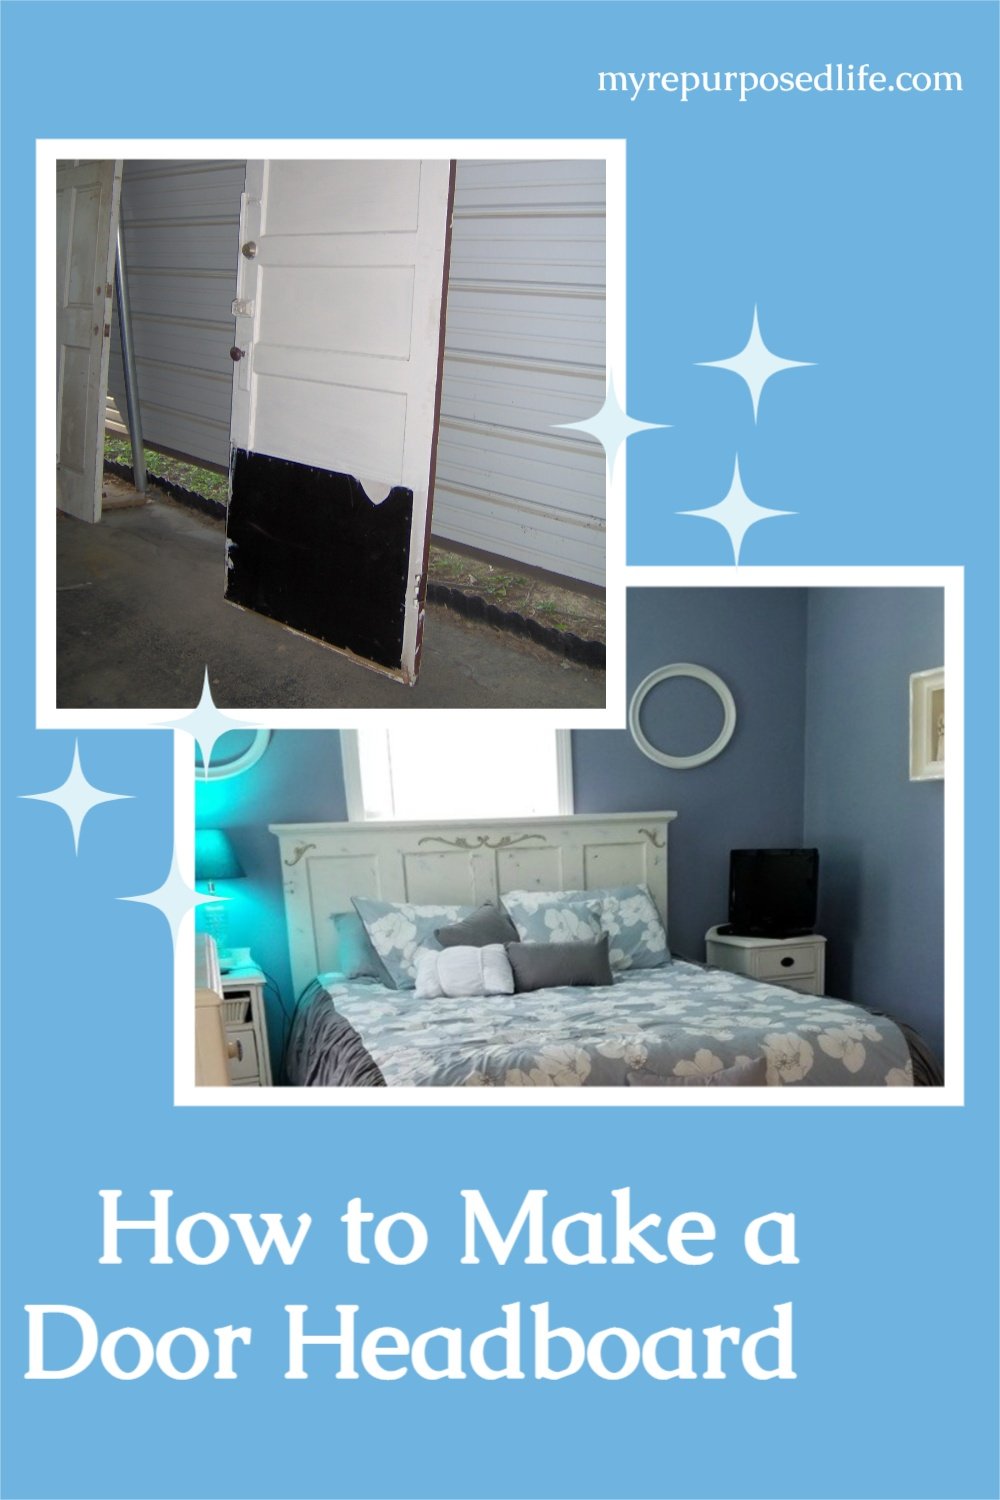 How to repurpose an old door into a unique headboard. Easy tutorial make your own headboard out of a door. #MyRepurposedLife #upcycle #repurposed #door #headboard #tutorial via @repurposedlife